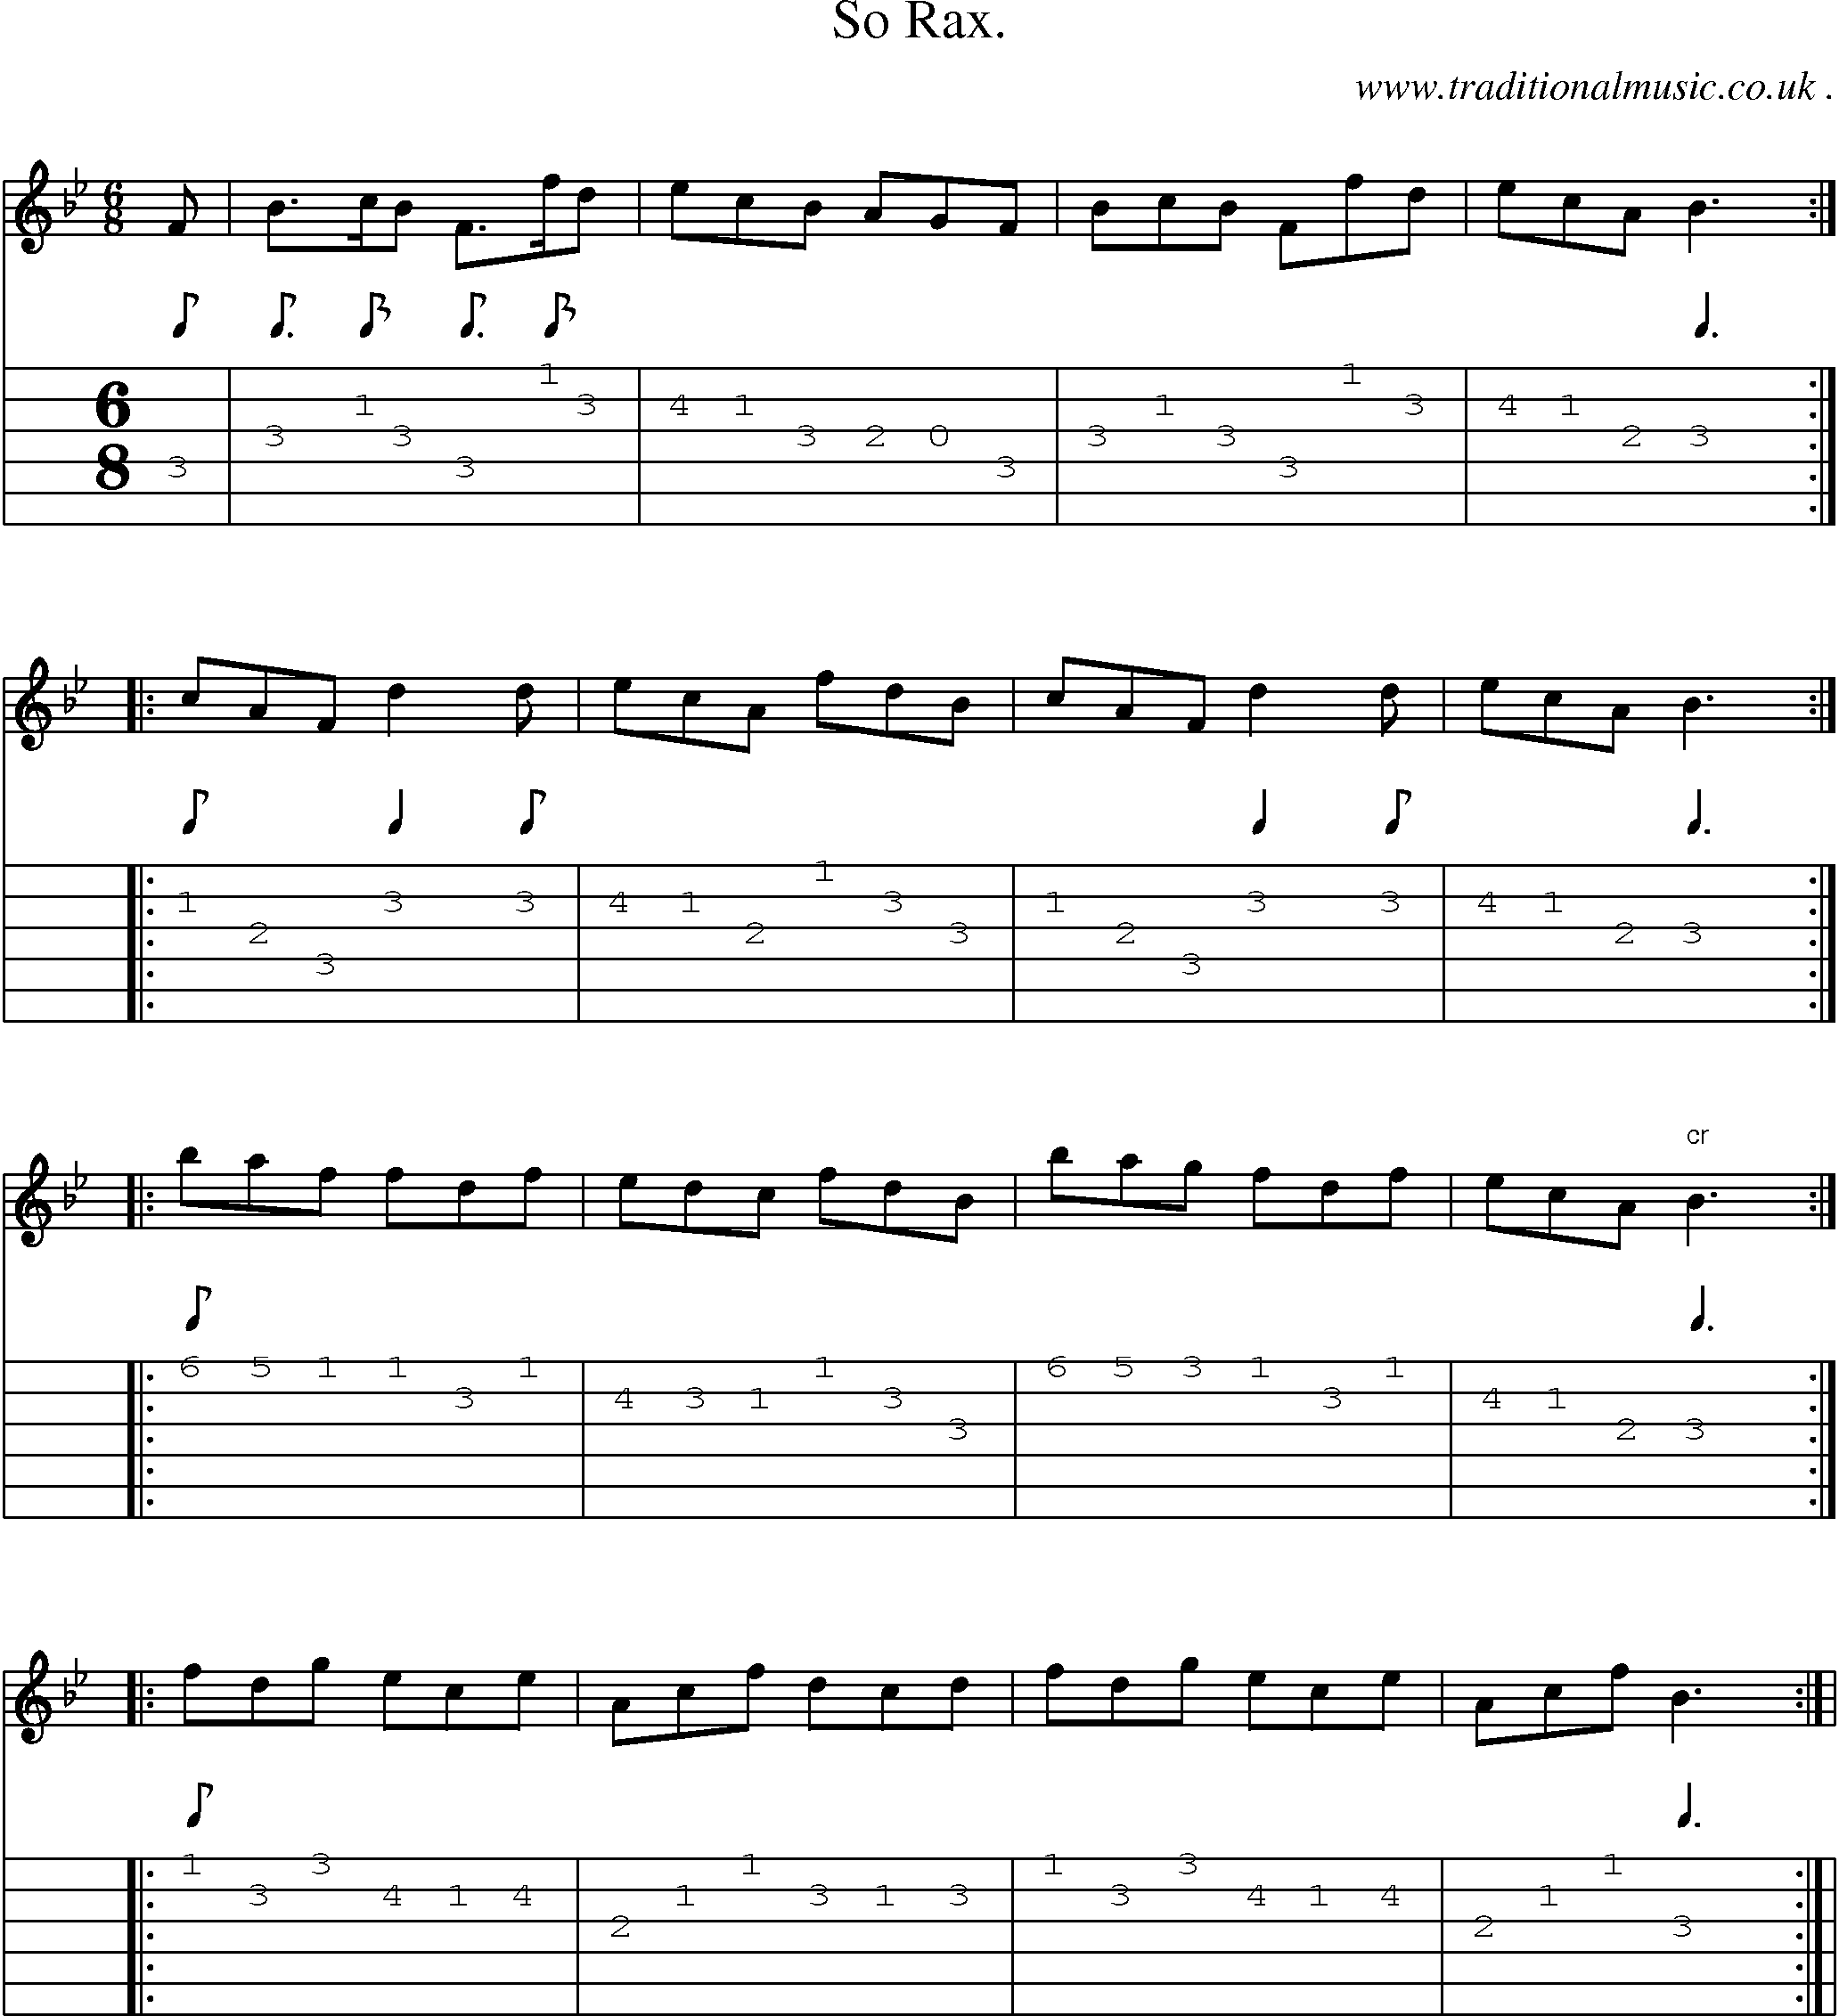 Sheet-Music and Guitar Tabs for So Rax